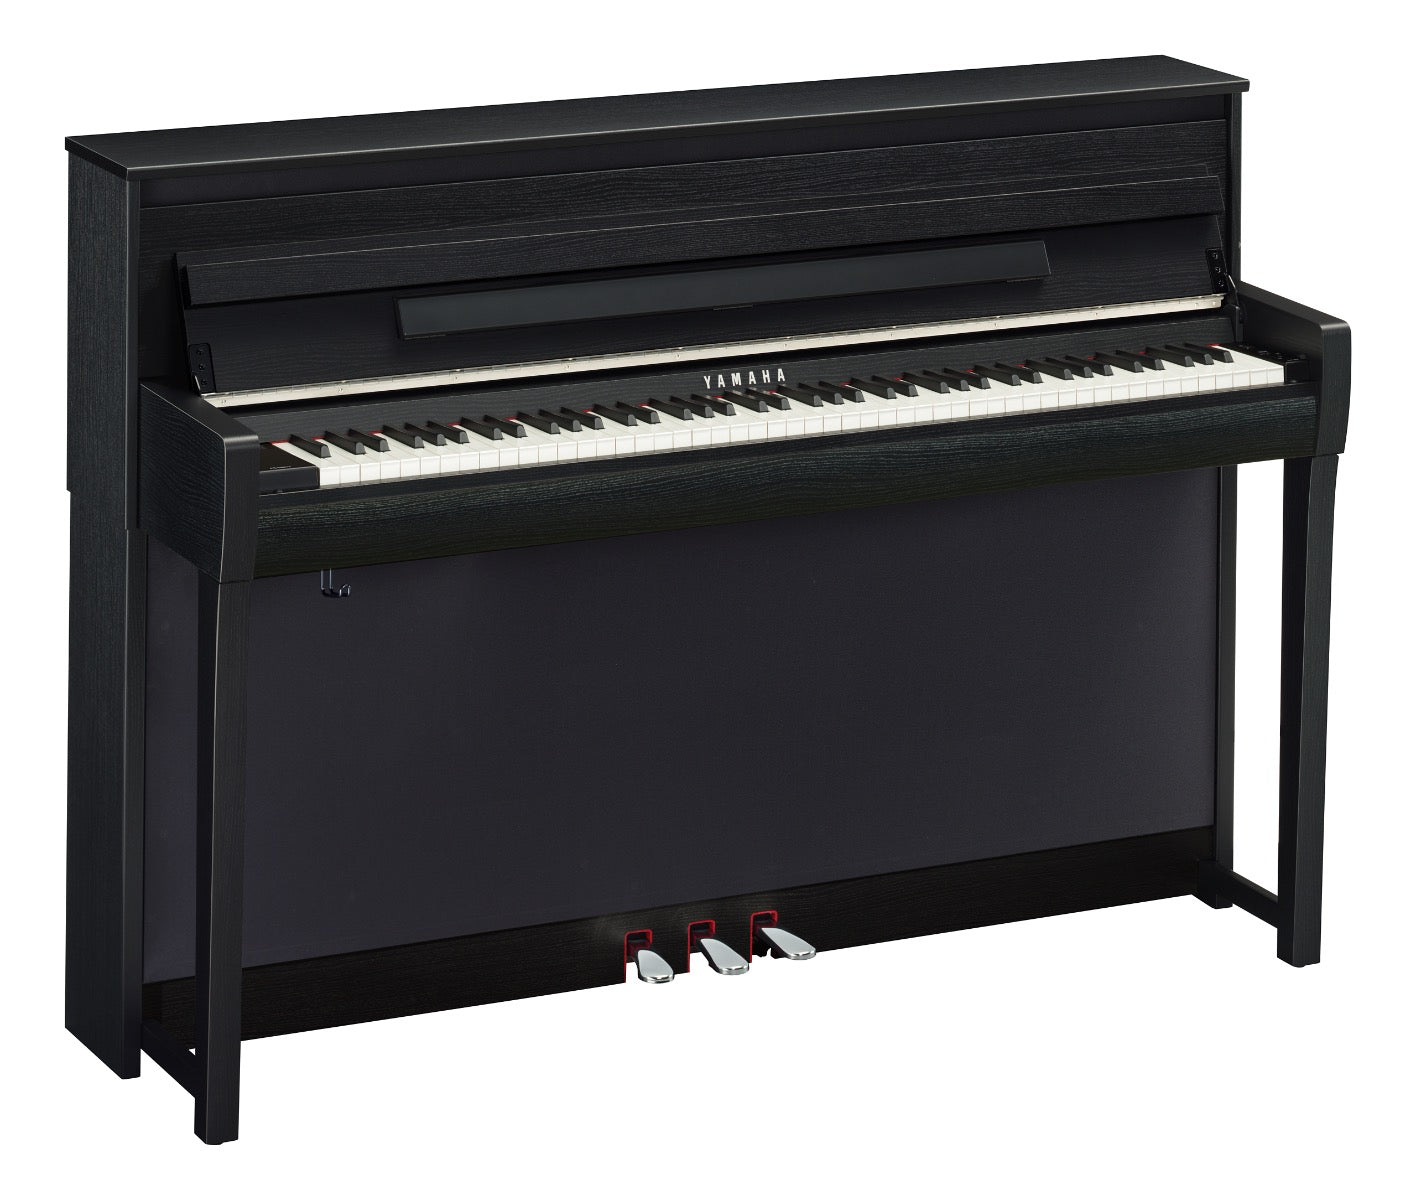 3/4 view of Yamaha Clavinova CLP-785 Digital Piano - Matte Black showing front, top and left side